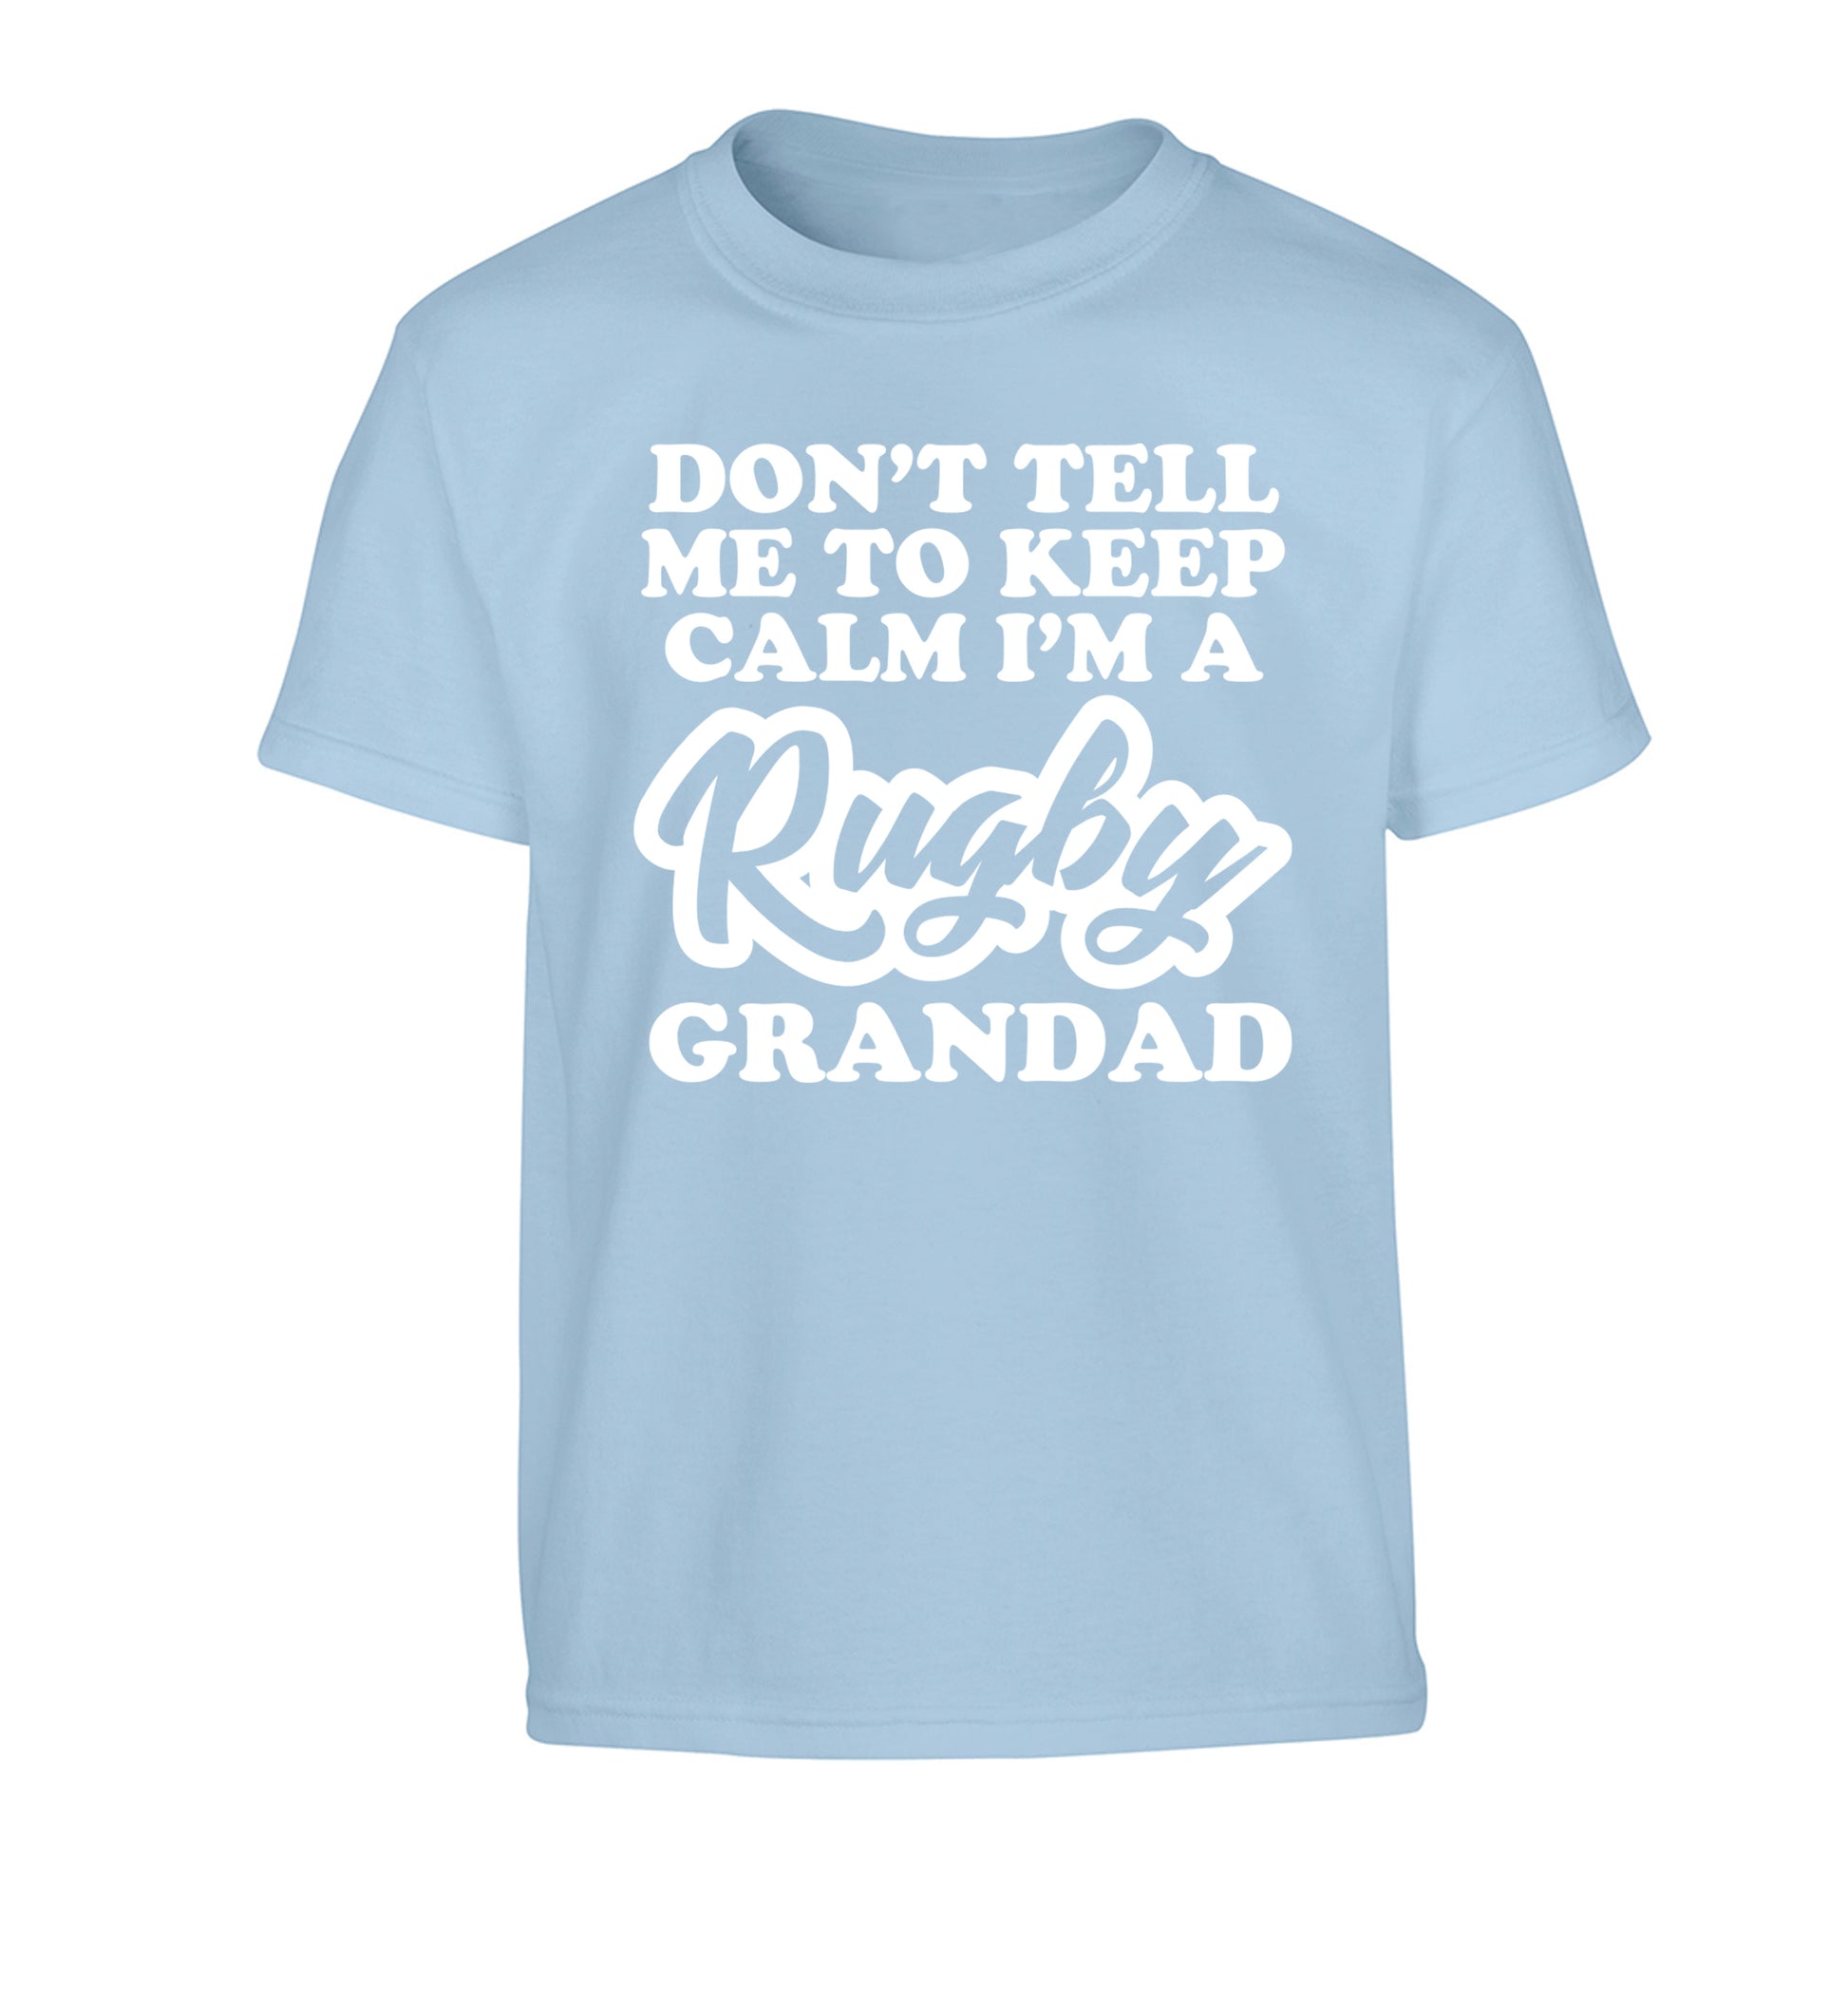 Don't tell me to keep calm I'm a rugby dad Children's light blue Tshirt 12-13 Years